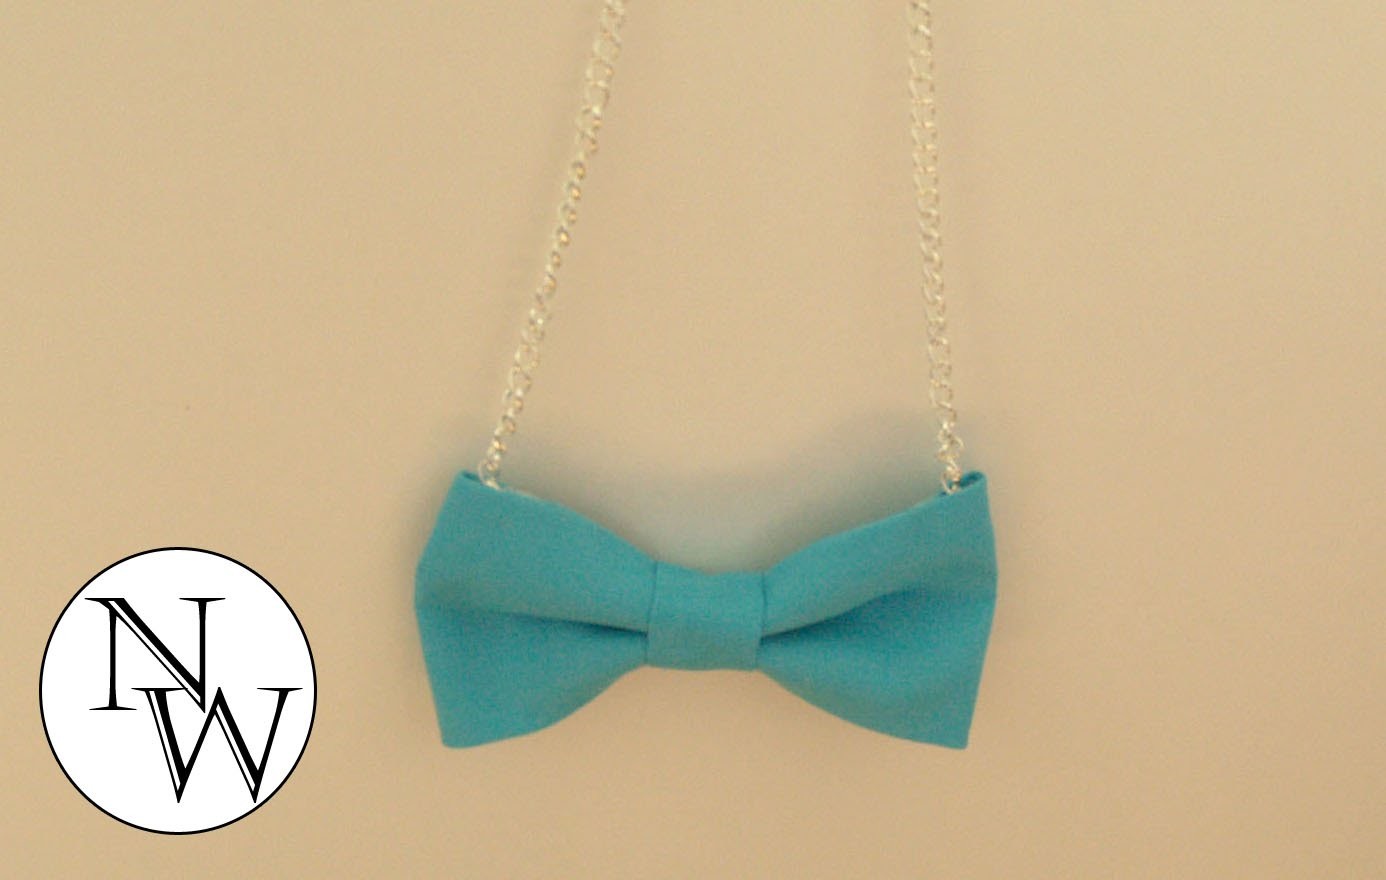 How To Make A Bowtie Necklace